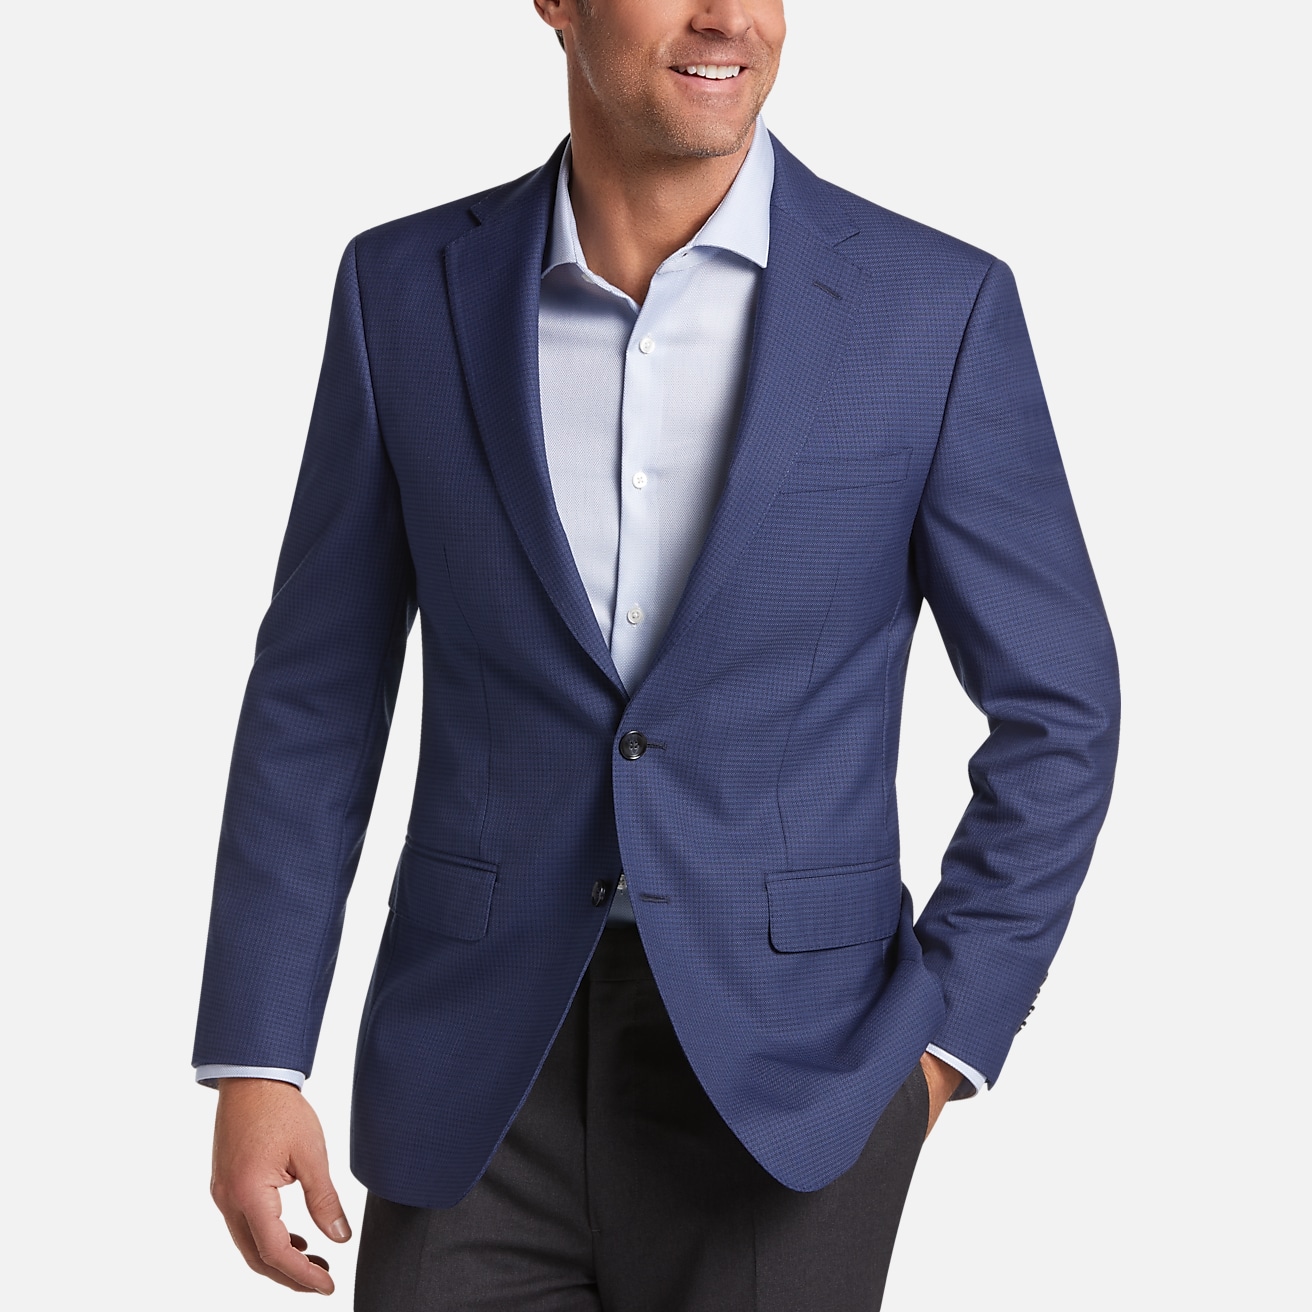 CK 2 BTN BLUE MINI HOUNDSTOOTH CHECK SPORTCOAT